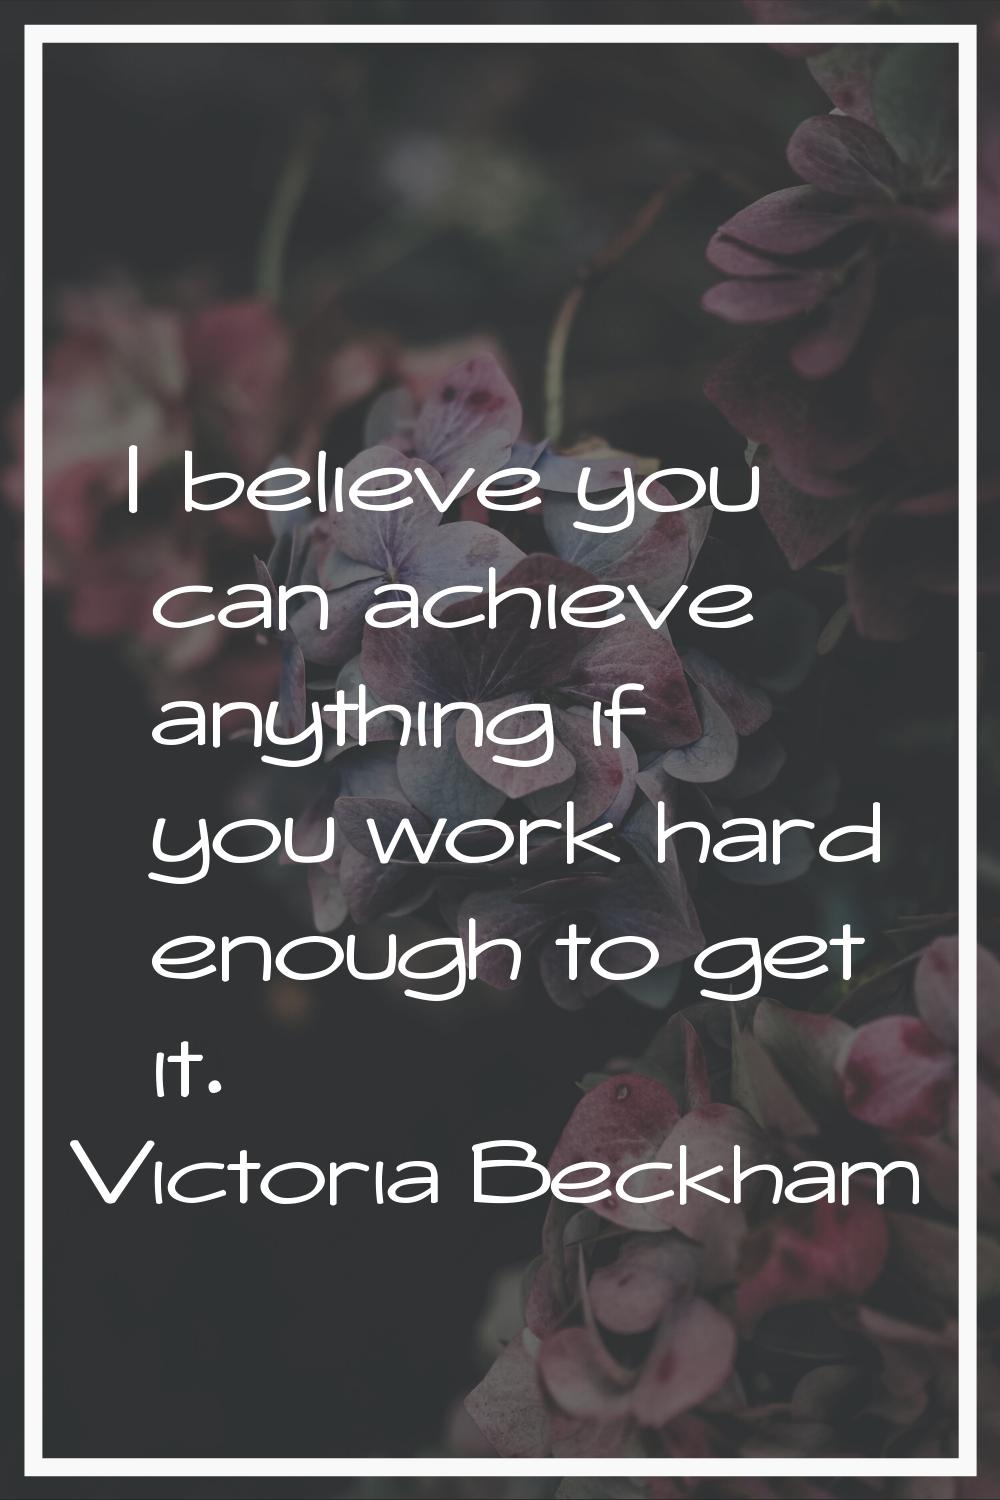 I believe you can achieve anything if you work hard enough to get it.